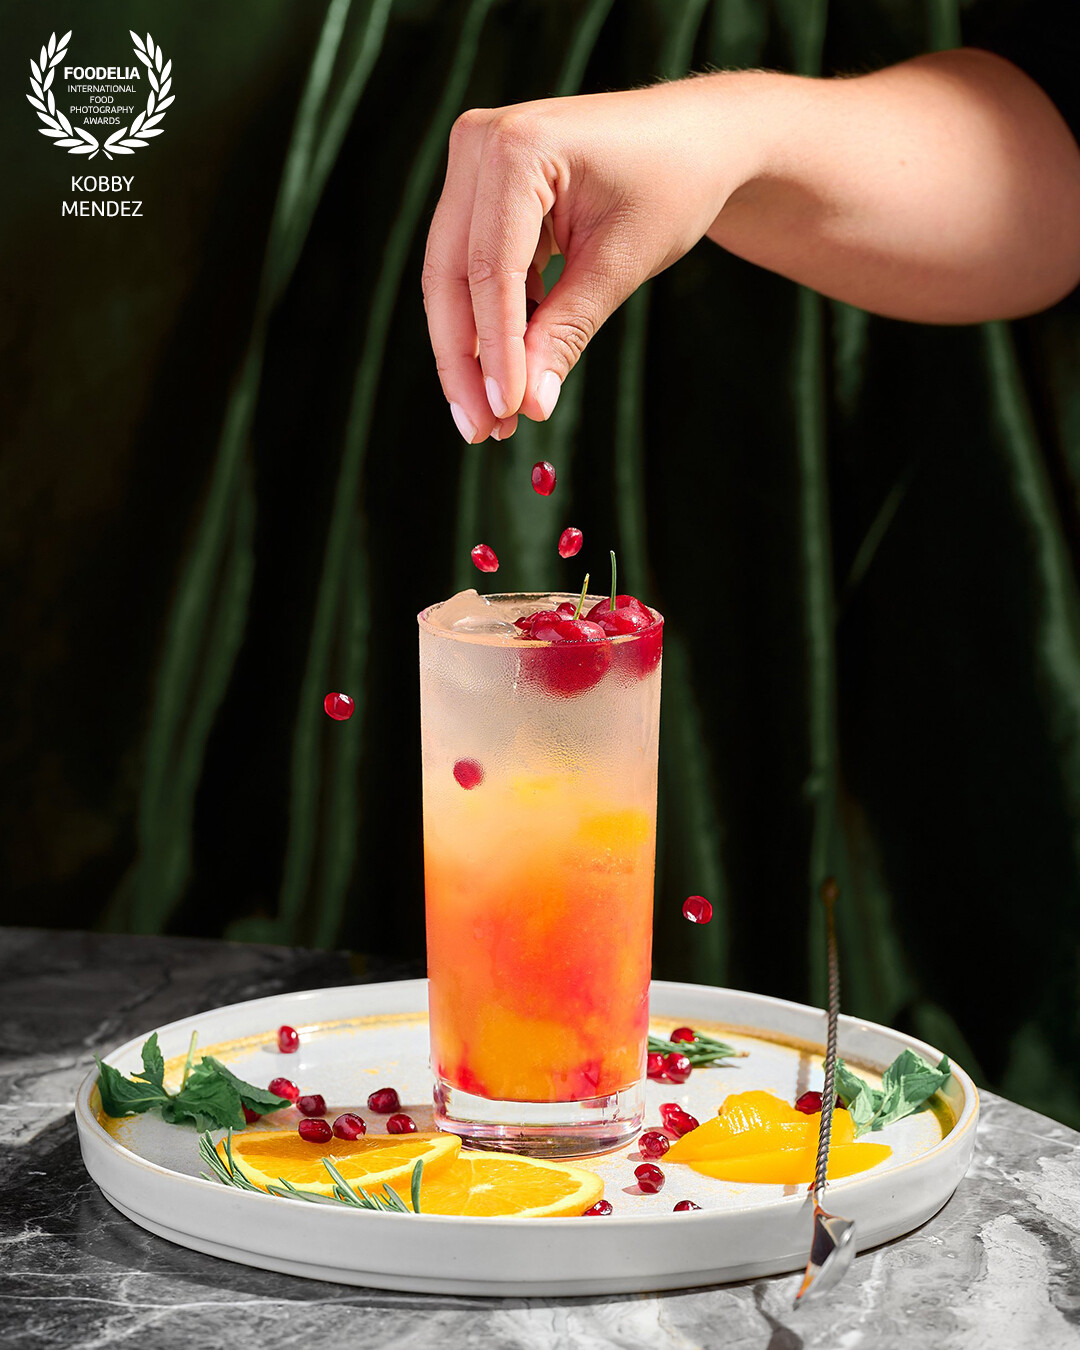 We managed to take this photo with the @labrandr team for one of the restaurants that they work for. The idea was to show each ingredient that the drink contained in an elegant and striking way.